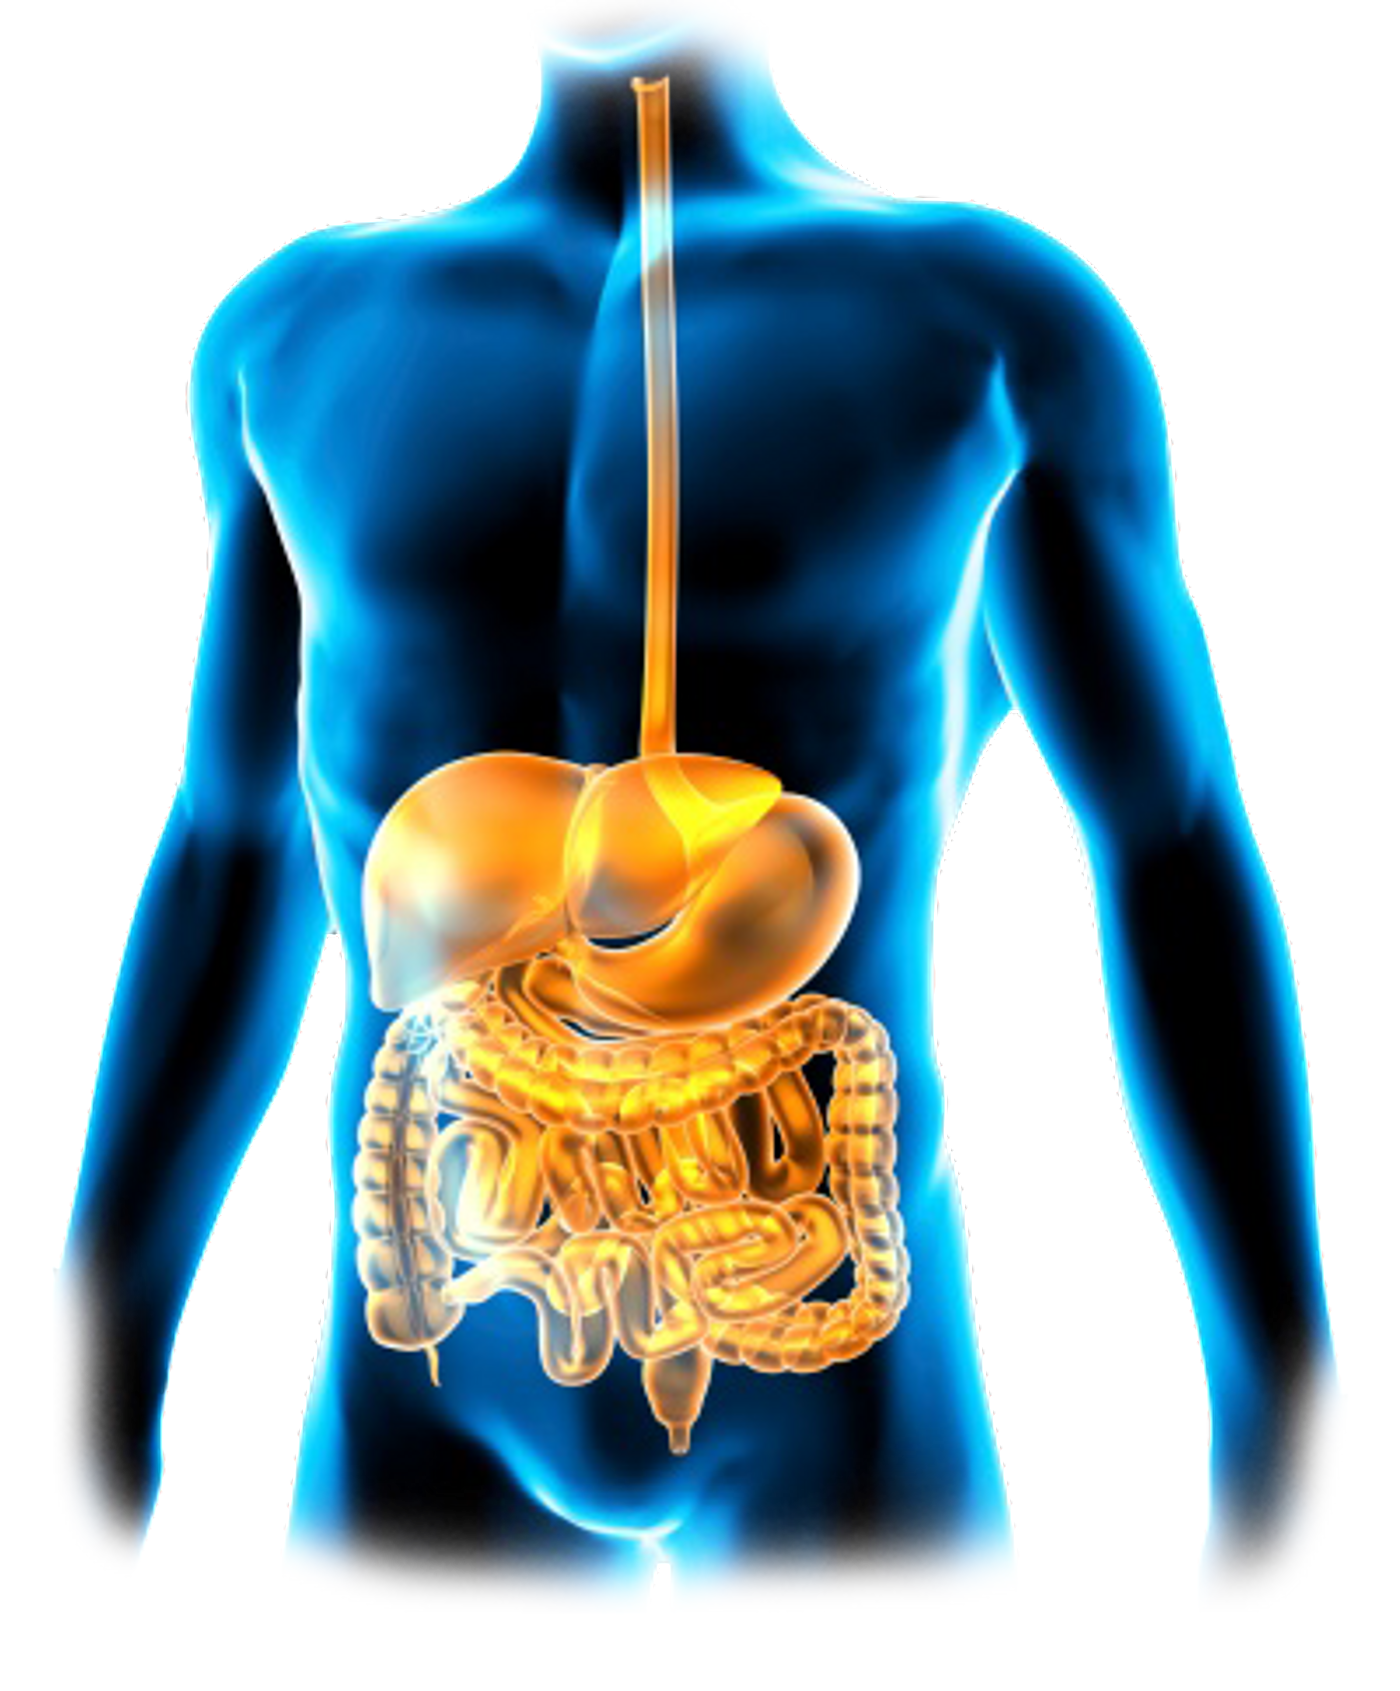 The GI tract is the pathway food takes from the mouth to the intestines where the nutrients are extracted for the needs of the body. Credit: Gastroenterology Associates of the Piedmont, PA